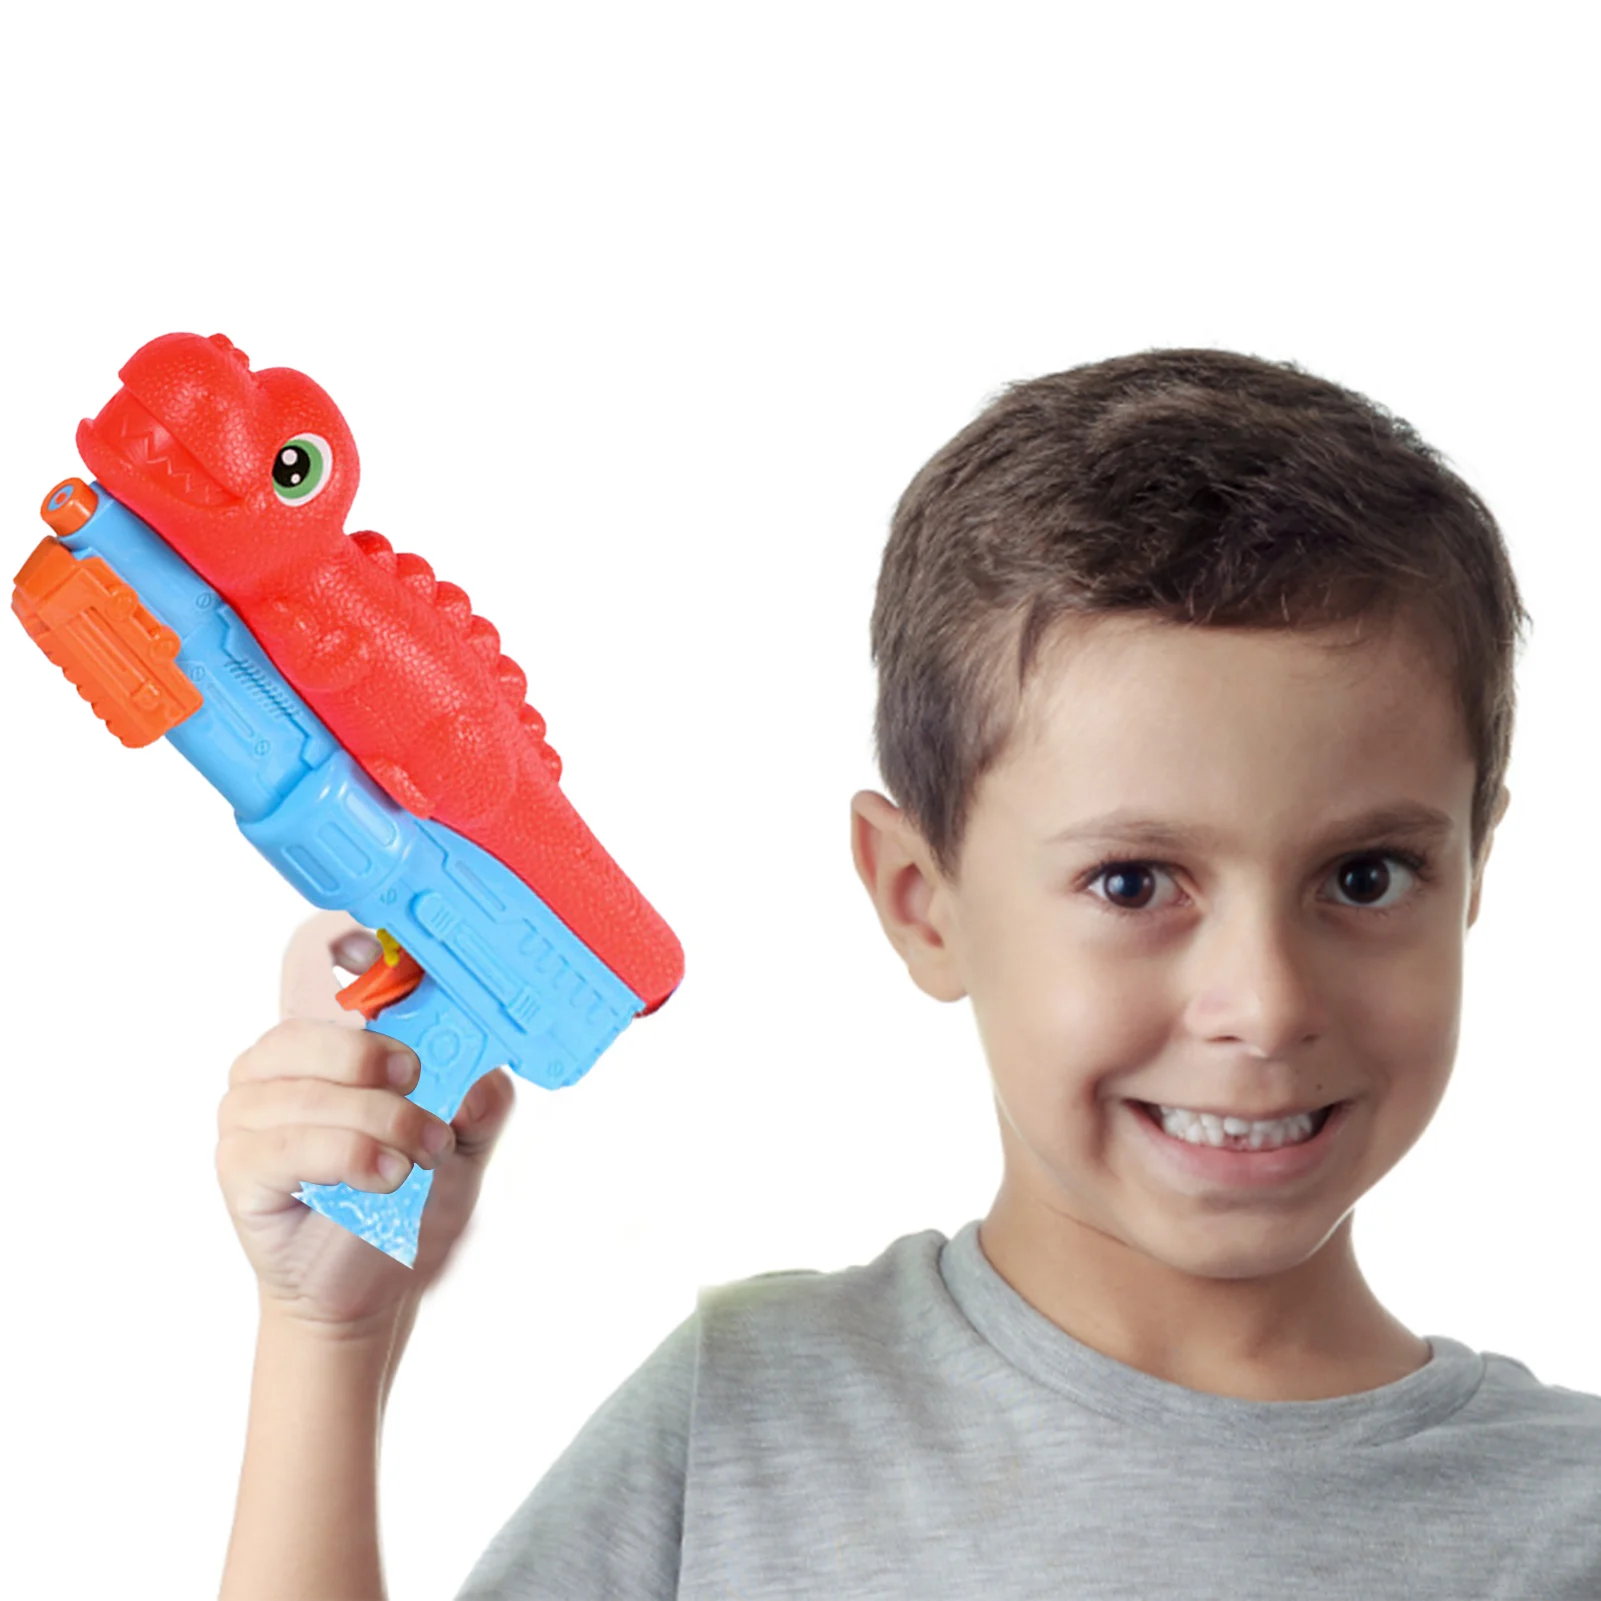 

Dinosaur Water Guns For Kids Super Water Soaker Blaster Pool Toys For Kids Outside Water Fighting High Capacity Innovative Water